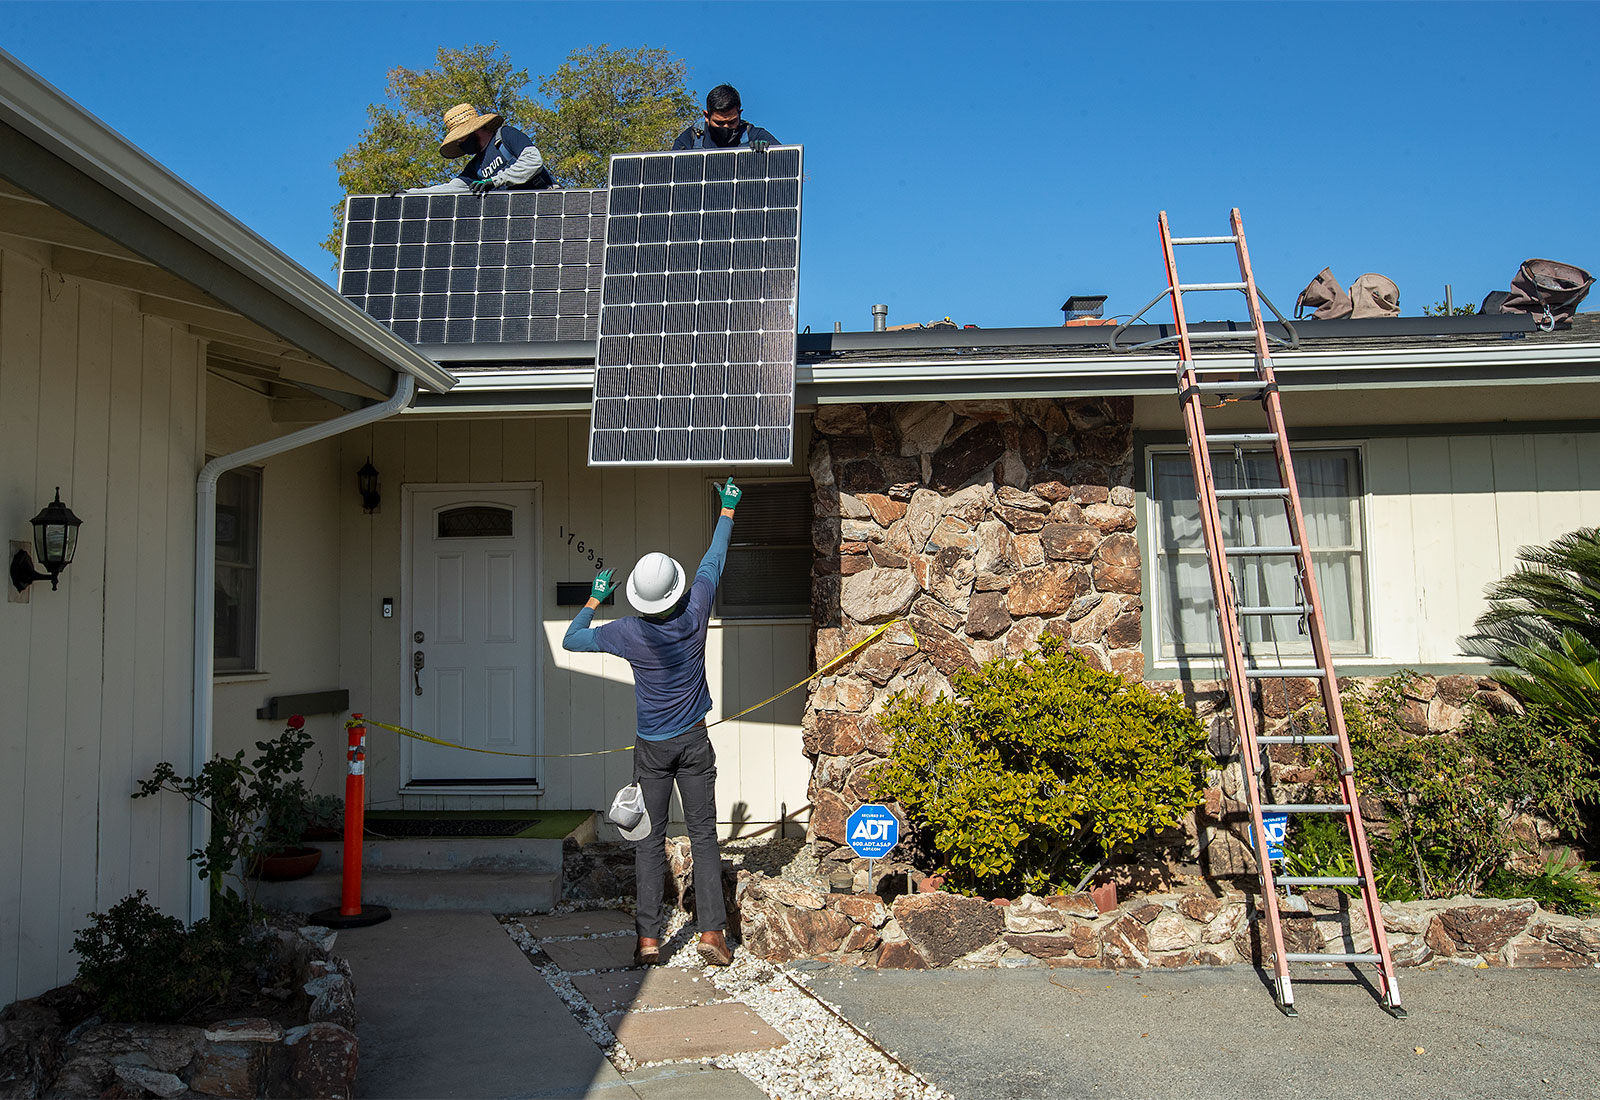 Two men on the roof of a home installing solar panels, one man on ground lifting solar panel to roof